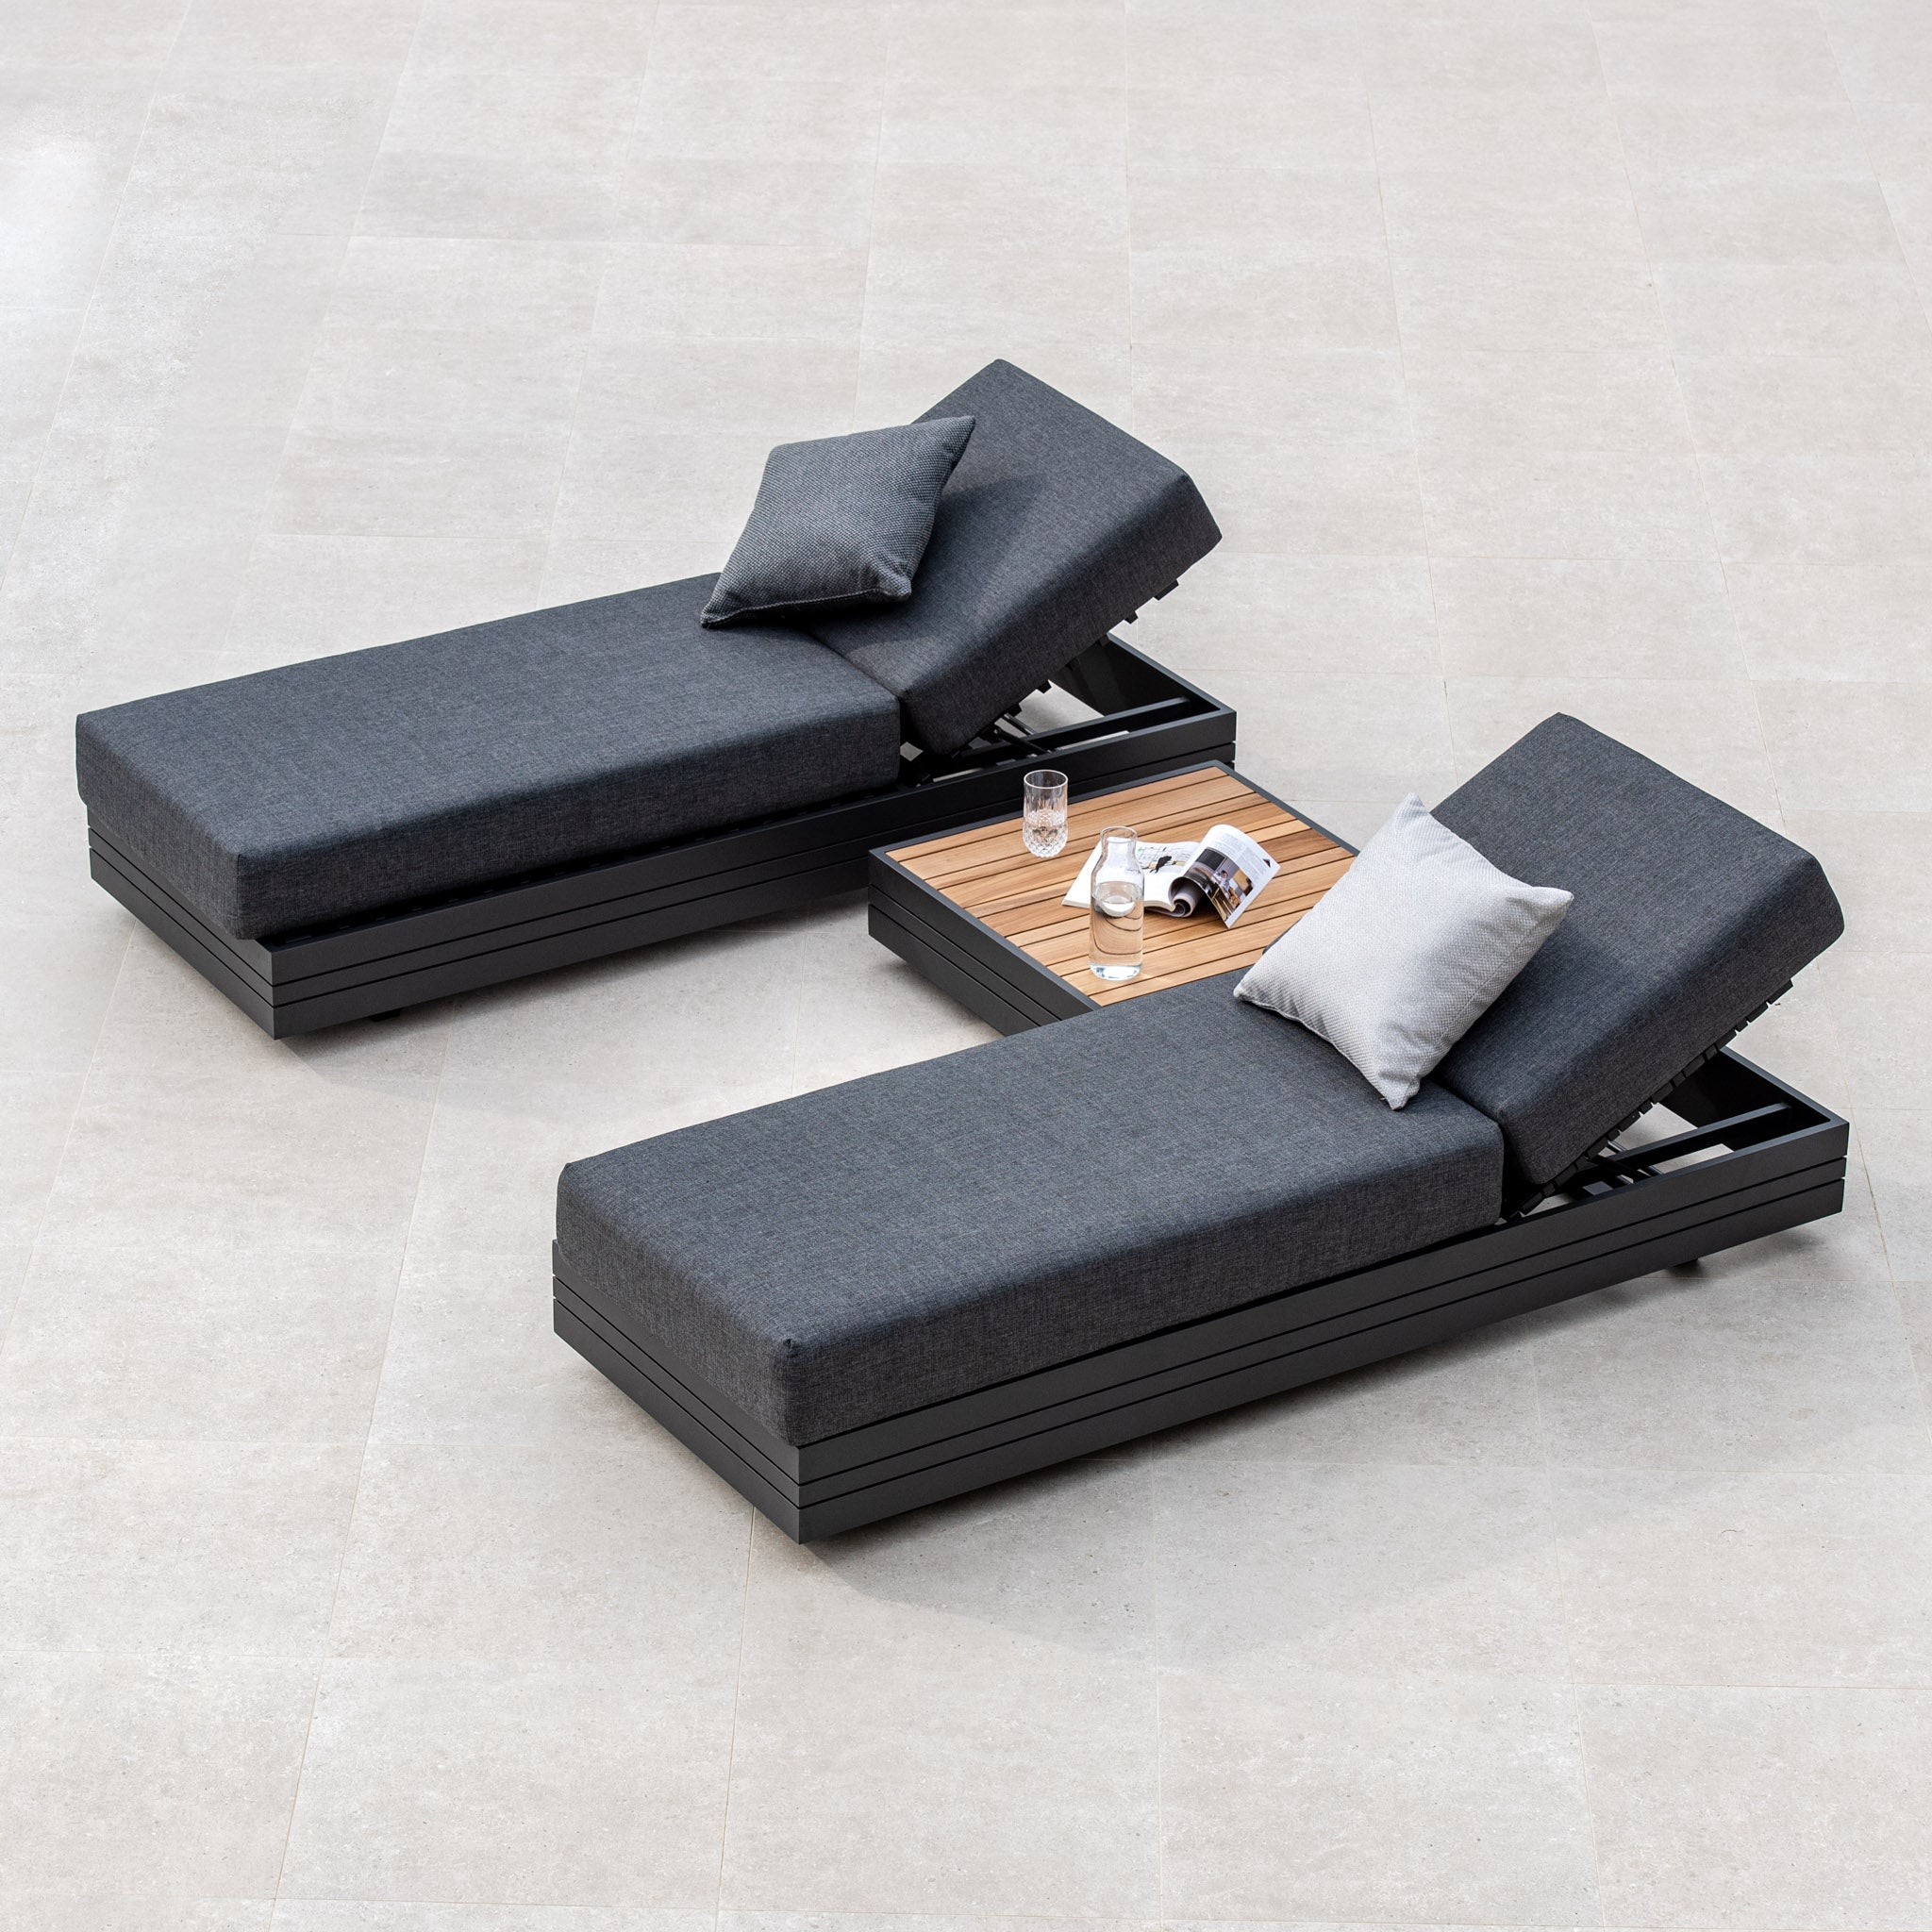 Panama 3 Seat Sofa with Sun Lounger Feature in Charcoal